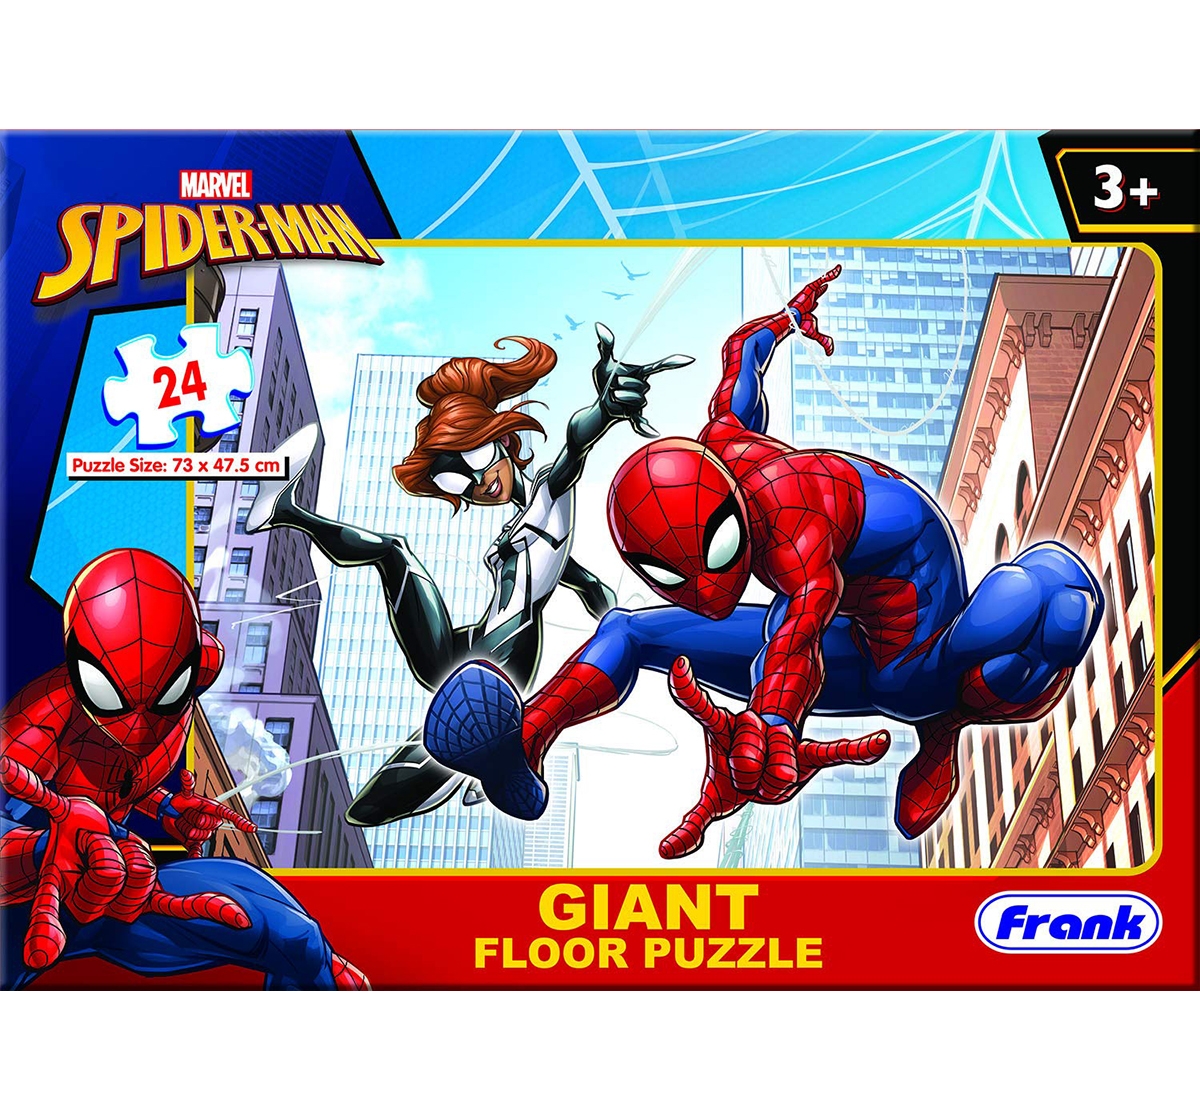 Frank | Frank Marvel'S Spider-Man Giant Floor Puzzle For 3 Year Old Kids And Above 